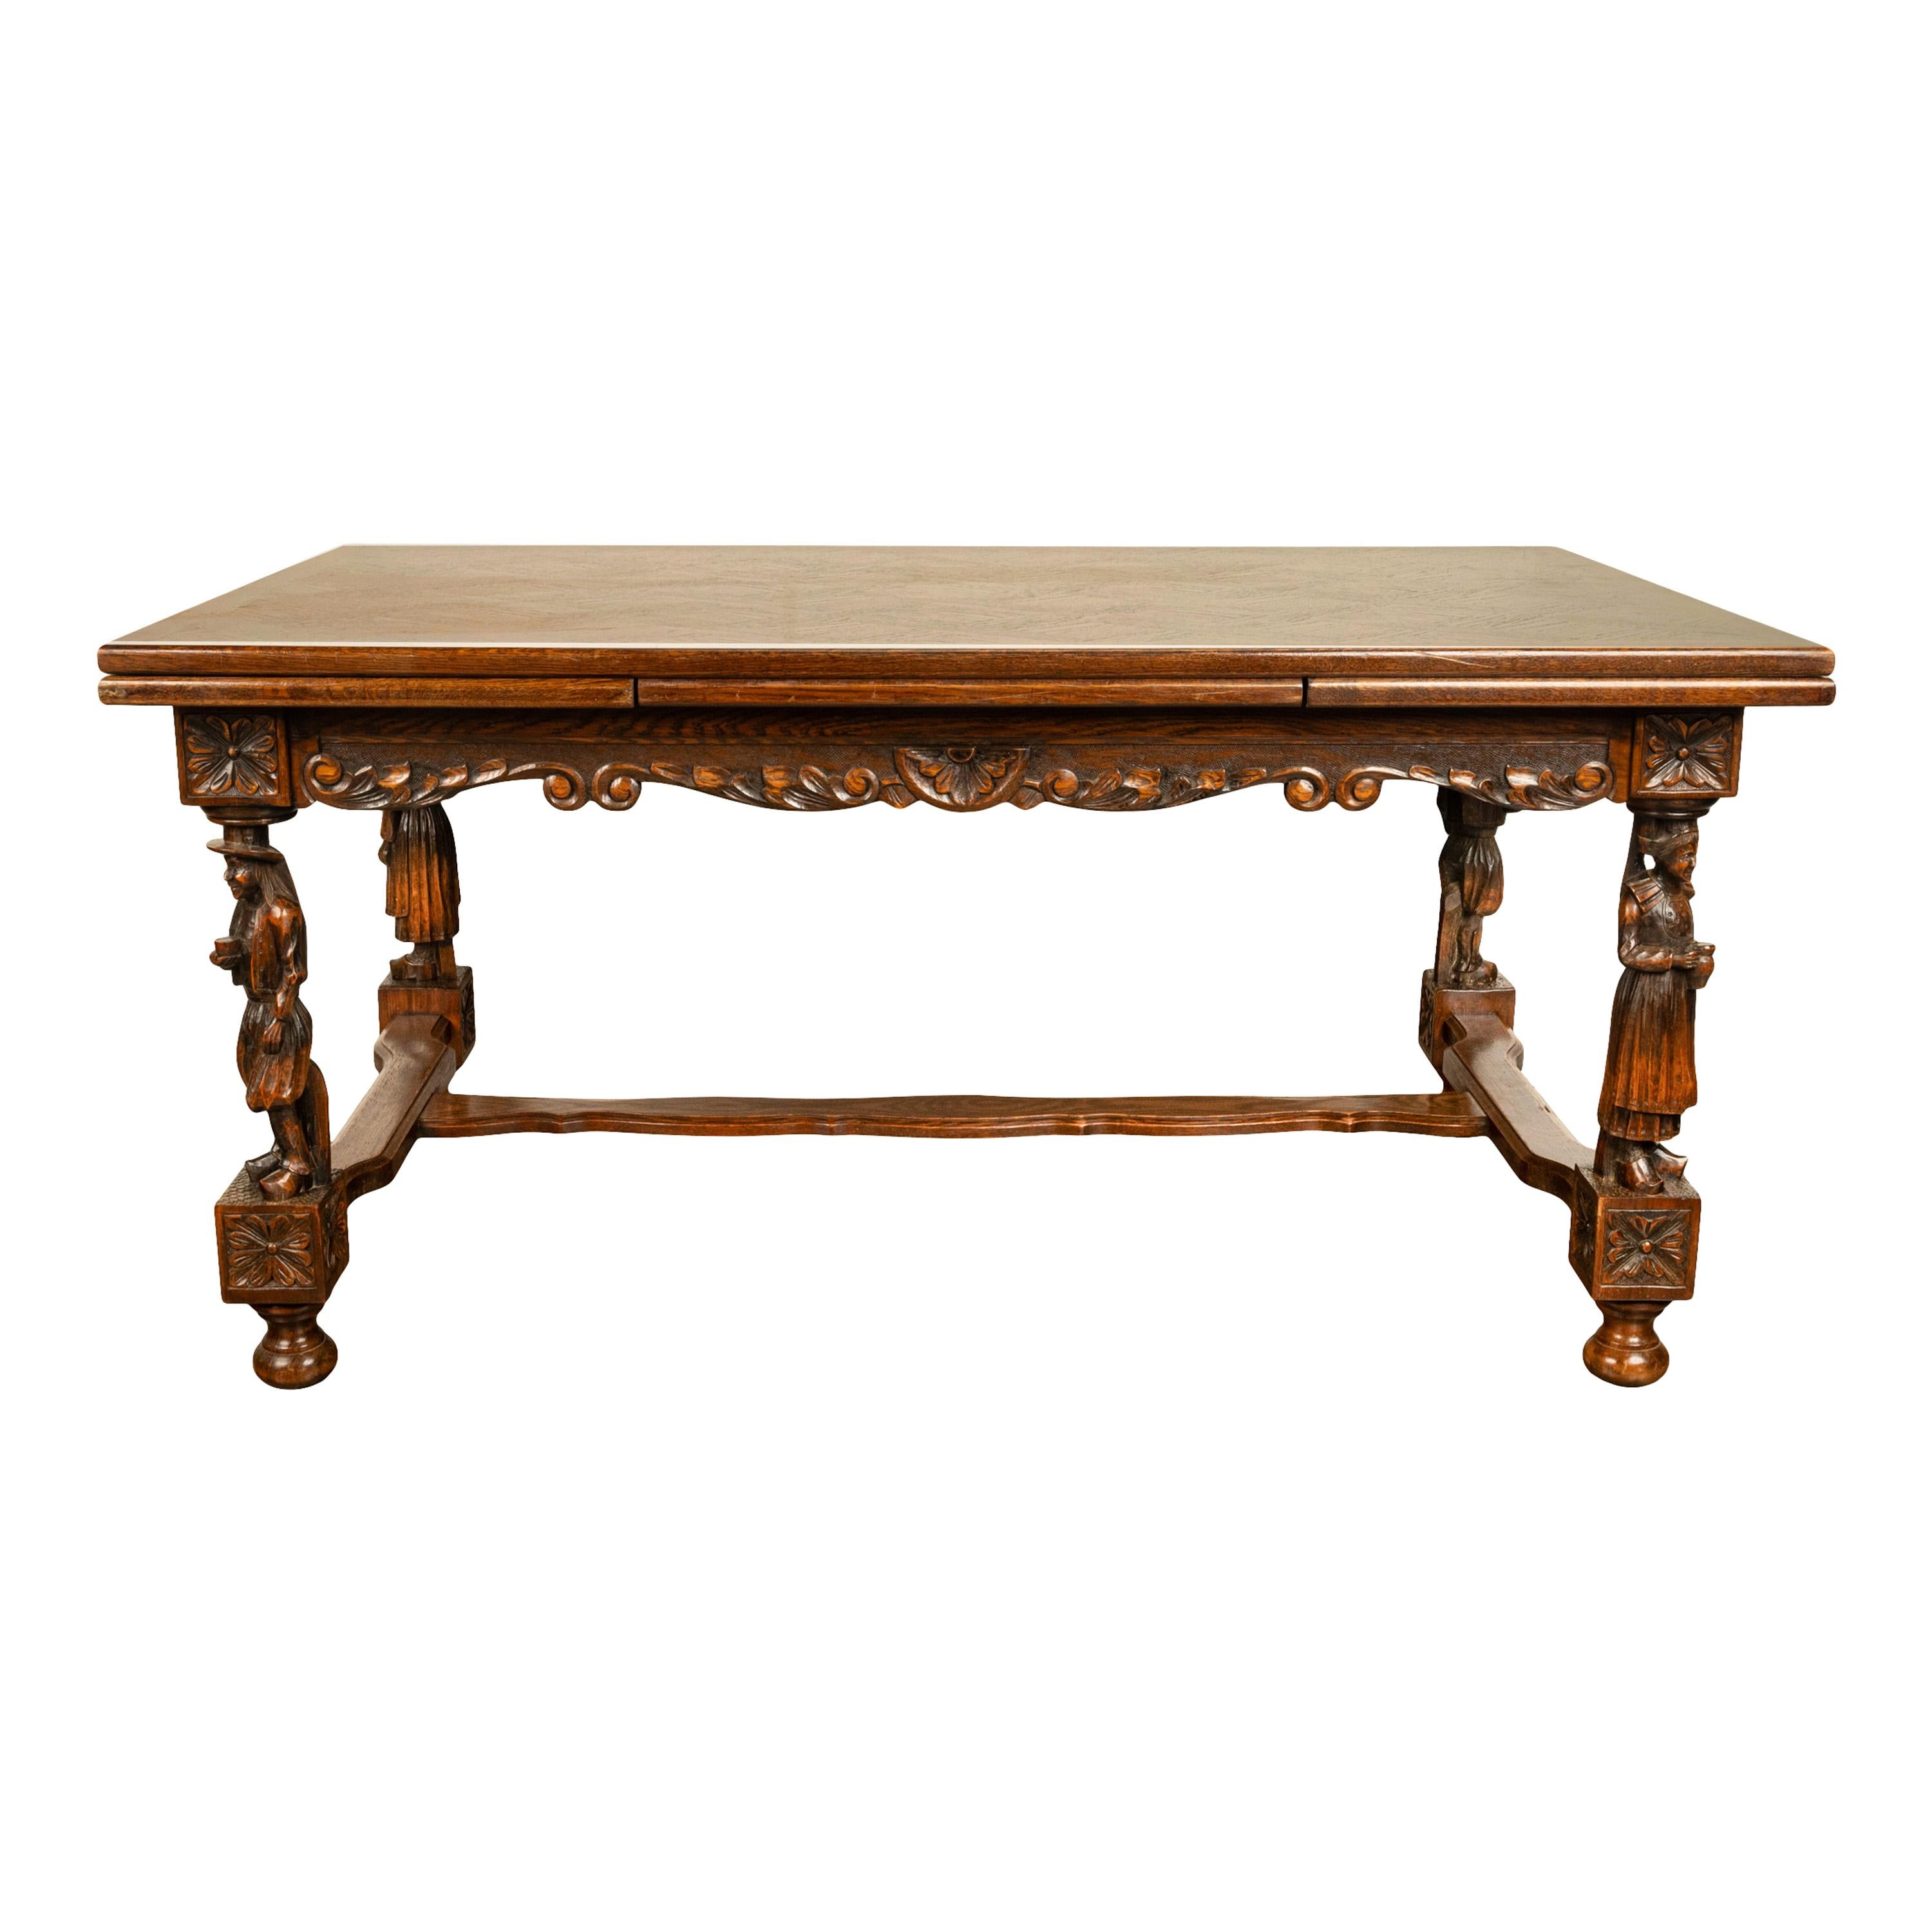 Antique Carved Figural French Breton Inlaid Dining Extending Table Brittany 1900 In Good Condition For Sale In Portland, OR